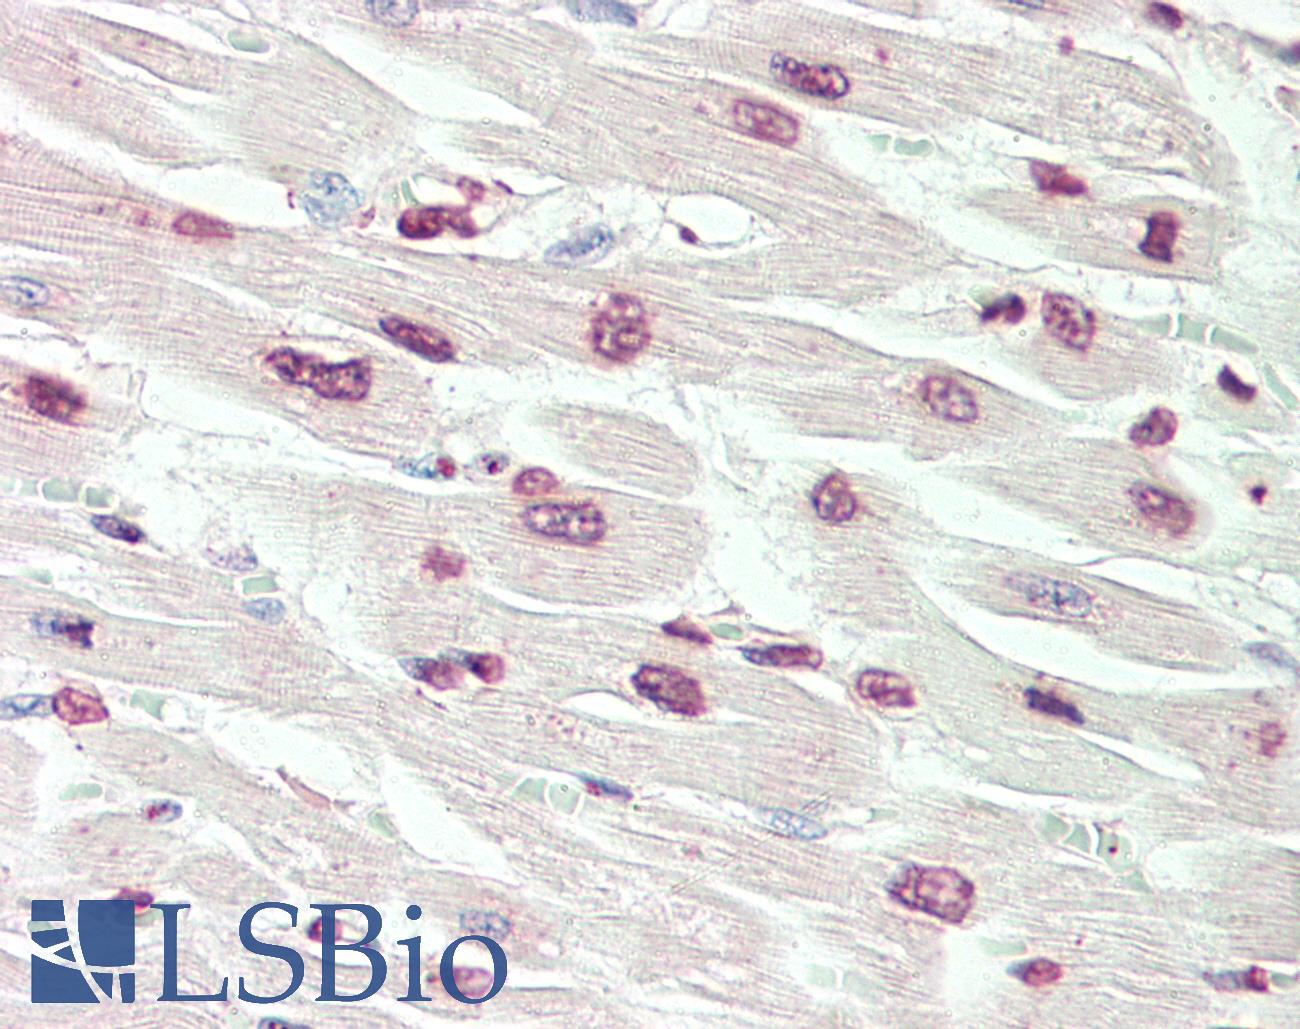 RPS6KA3 / RSK2 Antibody - Anti-RPS6KA3 / RSK2 antibody IHC staining of human heart. Immunohistochemistry of formalin-fixed, paraffin-embedded tissue after heat-induced antigen retrieval. Antibody dilution 1:50.